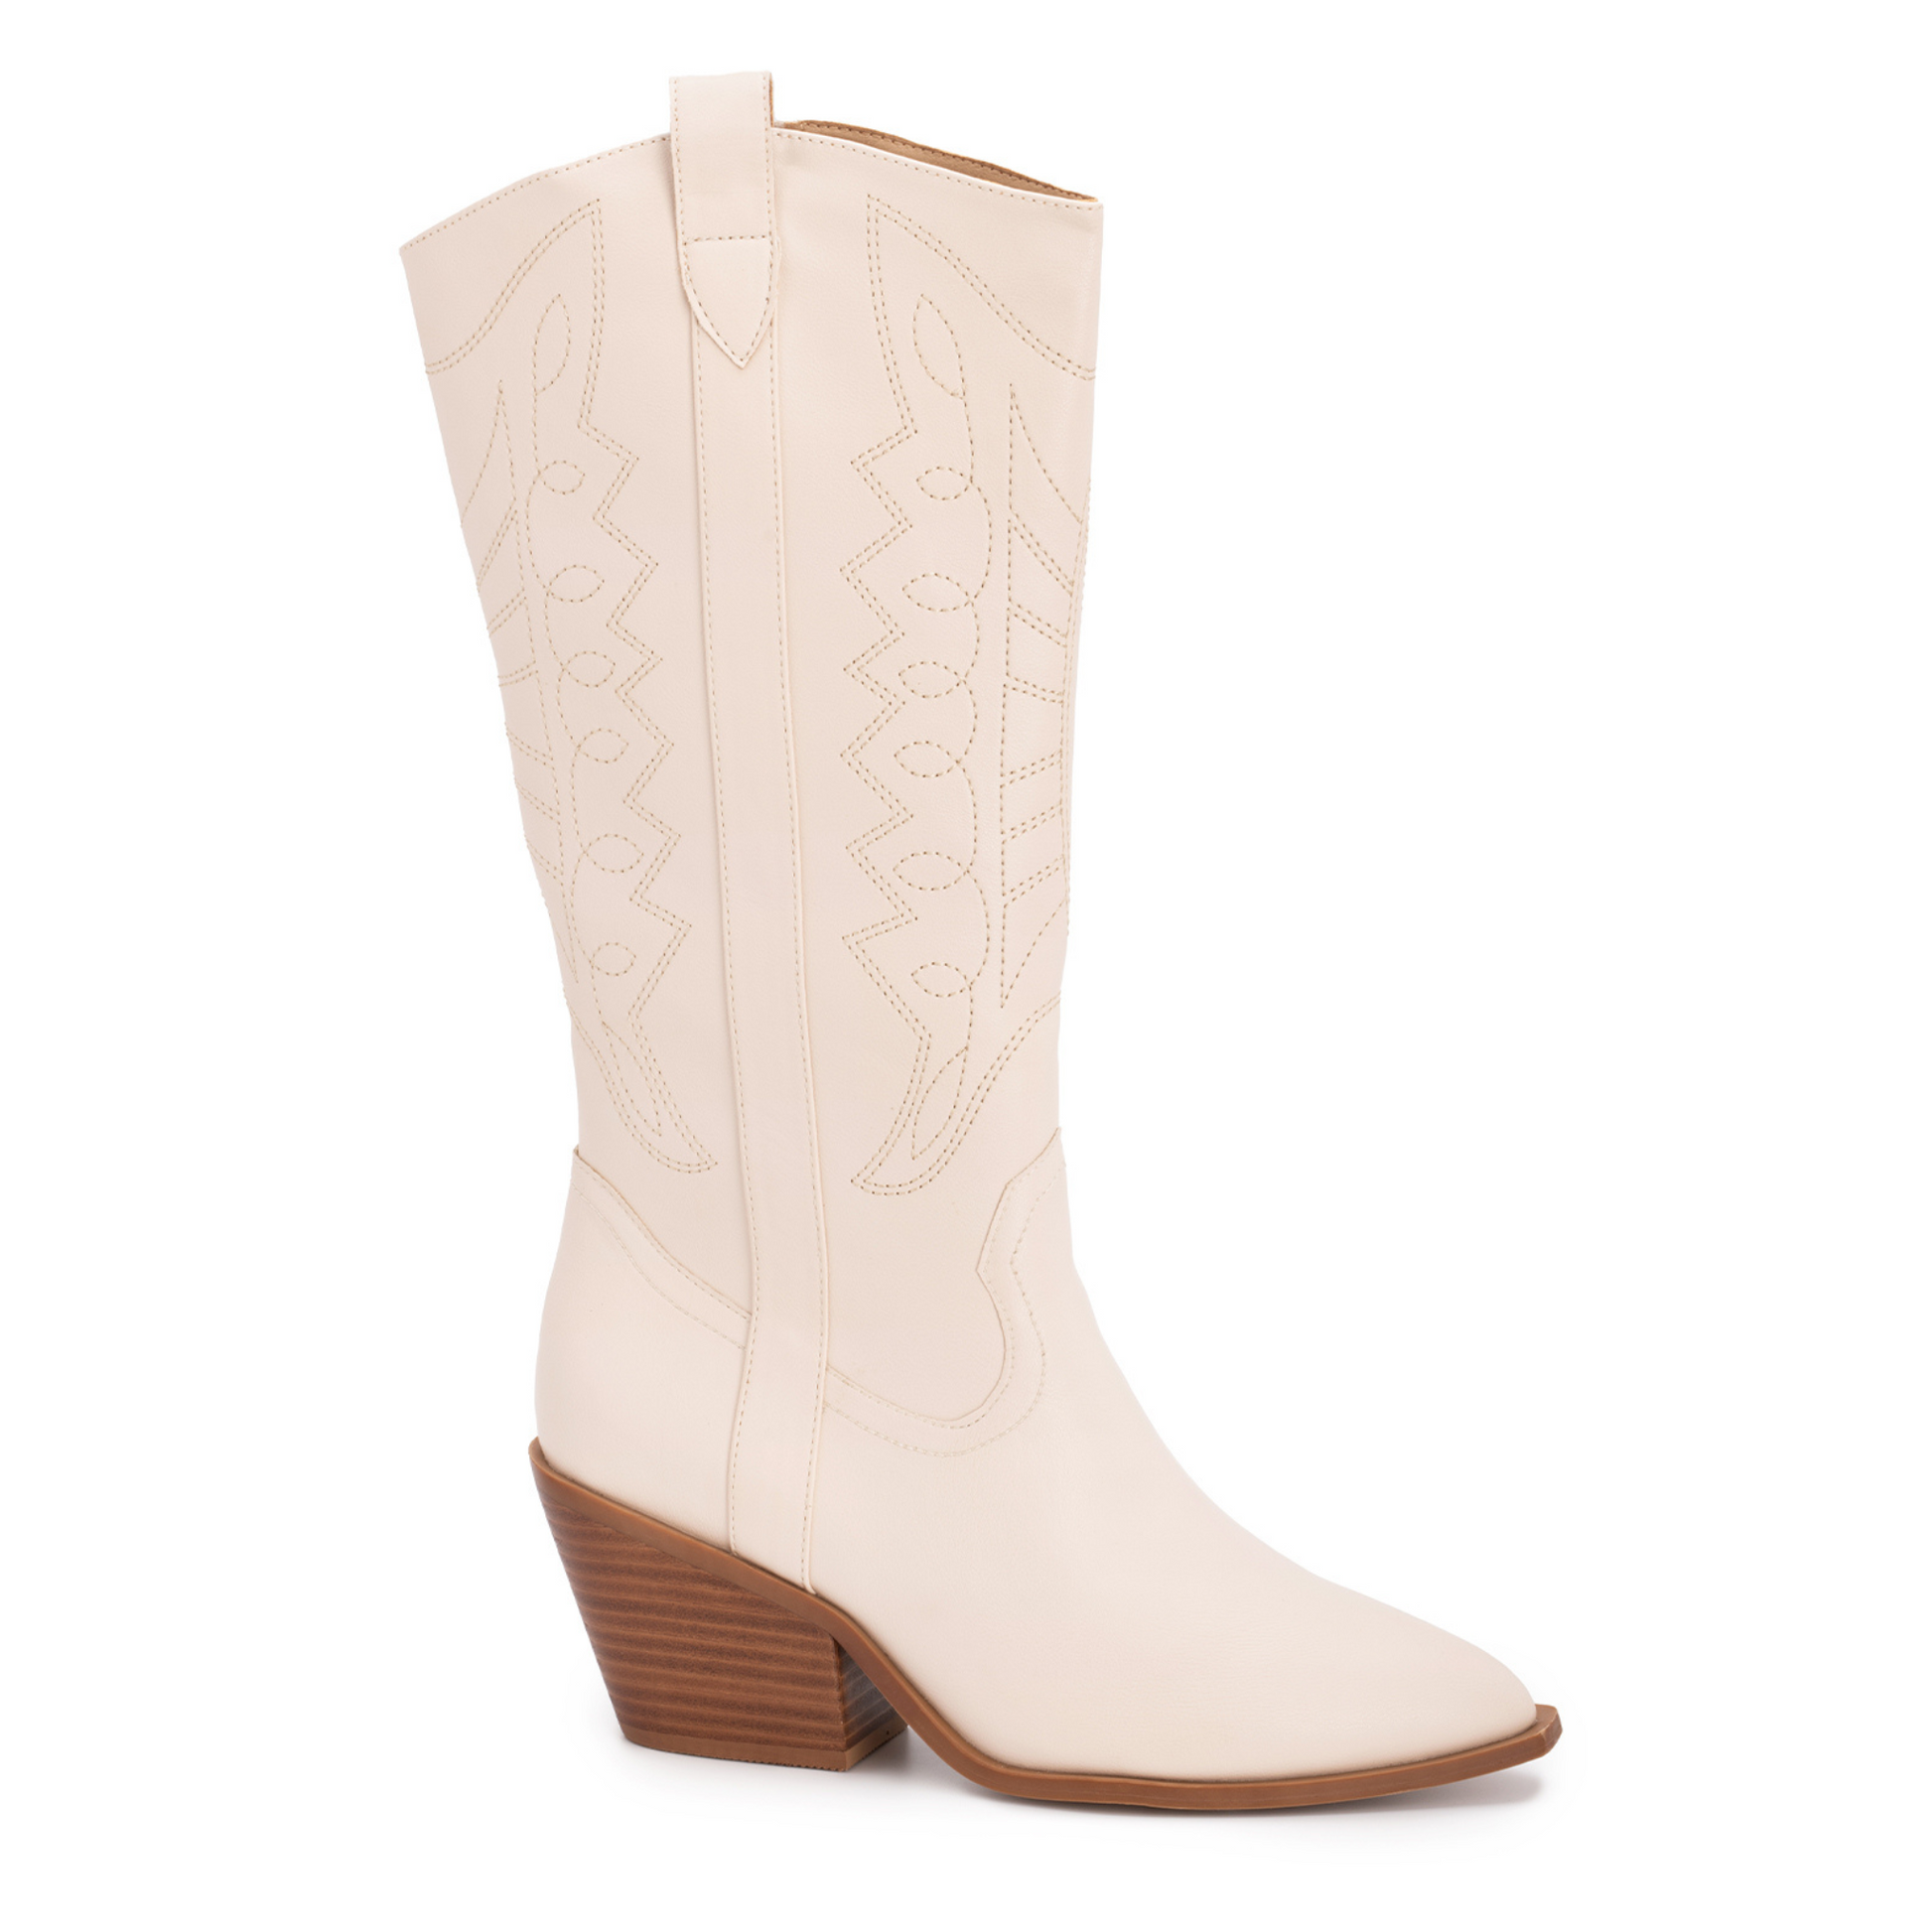 The Howdy Wide Calf boot is the perfect combination of style and functionality. The design of this boot features a Western-style silhouette and a wide calf, allowing for a comfortable fit for all. Its off-white color complements a variety of different styles, making it a versatile addition to any wardrobe.